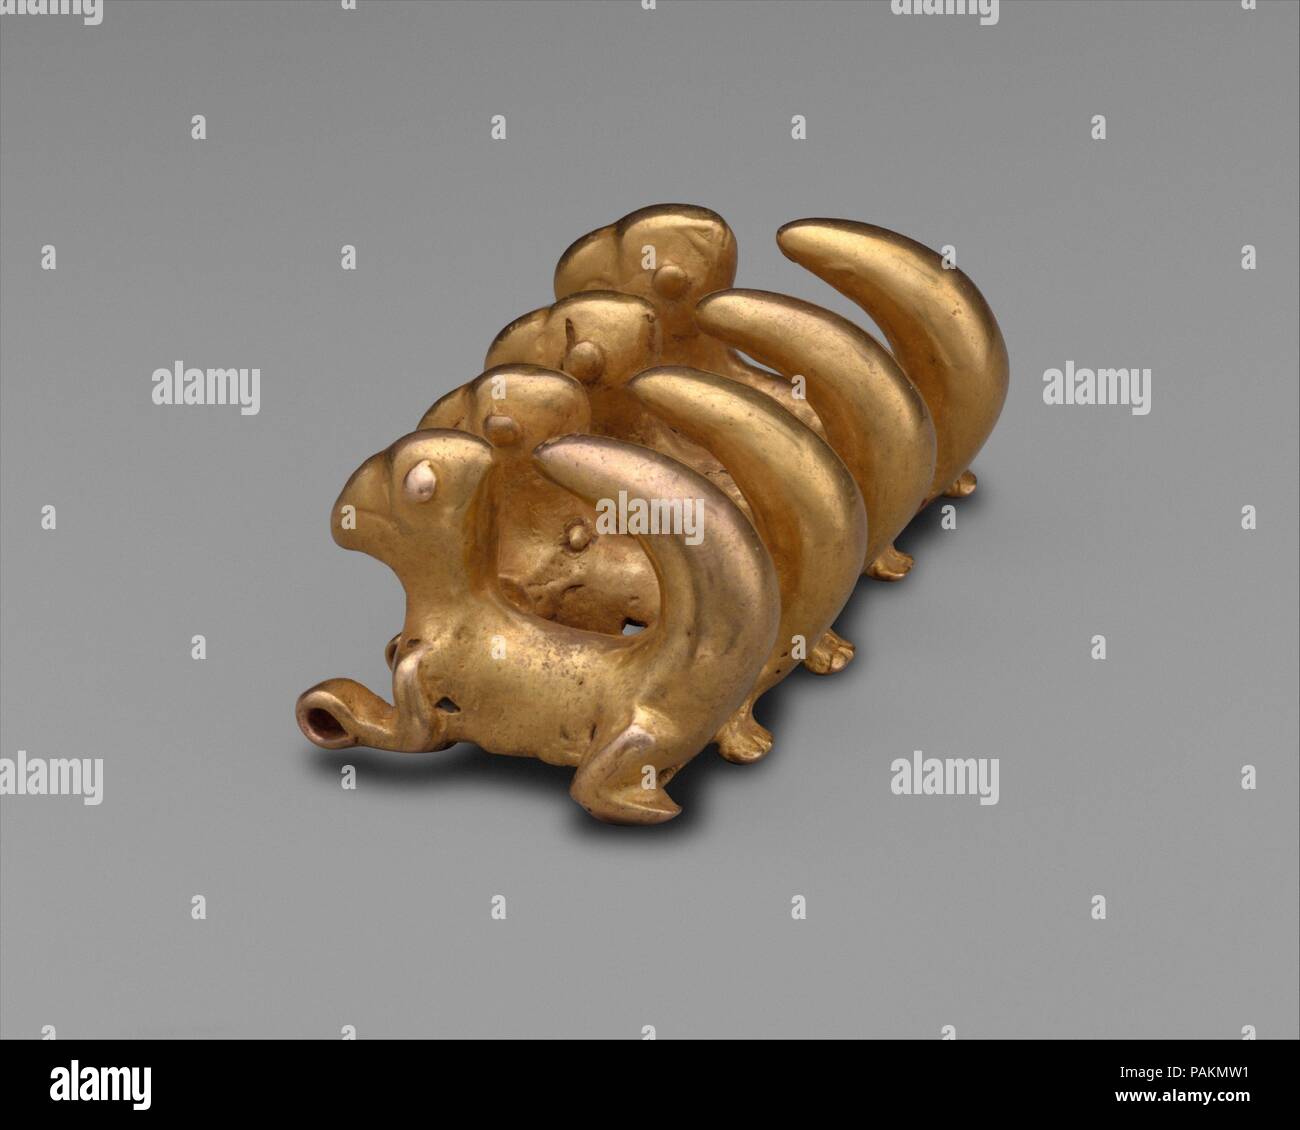 Curly-Tailed Animal Pendant. Culture: Chiriquí (?), Initial Style. Dimensions: H. 1 1/4 × W. 2 3/4 × D. 1 1/2 in. (3.2 × 7 × 3.8 cm). Date: A.D. 100-500.  This pendant, assigned to the Initial Style of the early first millennium AD, features four contiguous creatures, their wide tails arching over their backs.     Este colgante, asignado al Estilo Inicial del primer milenio d. C., presenta cuatro seres contiguos, con colas anchas arqueadas sobre sus espaldas.  <b>Further information</b>  Curly-tailed animals appear on pendants in groups of two, four, or six, though single animals are more comm Stock Photo